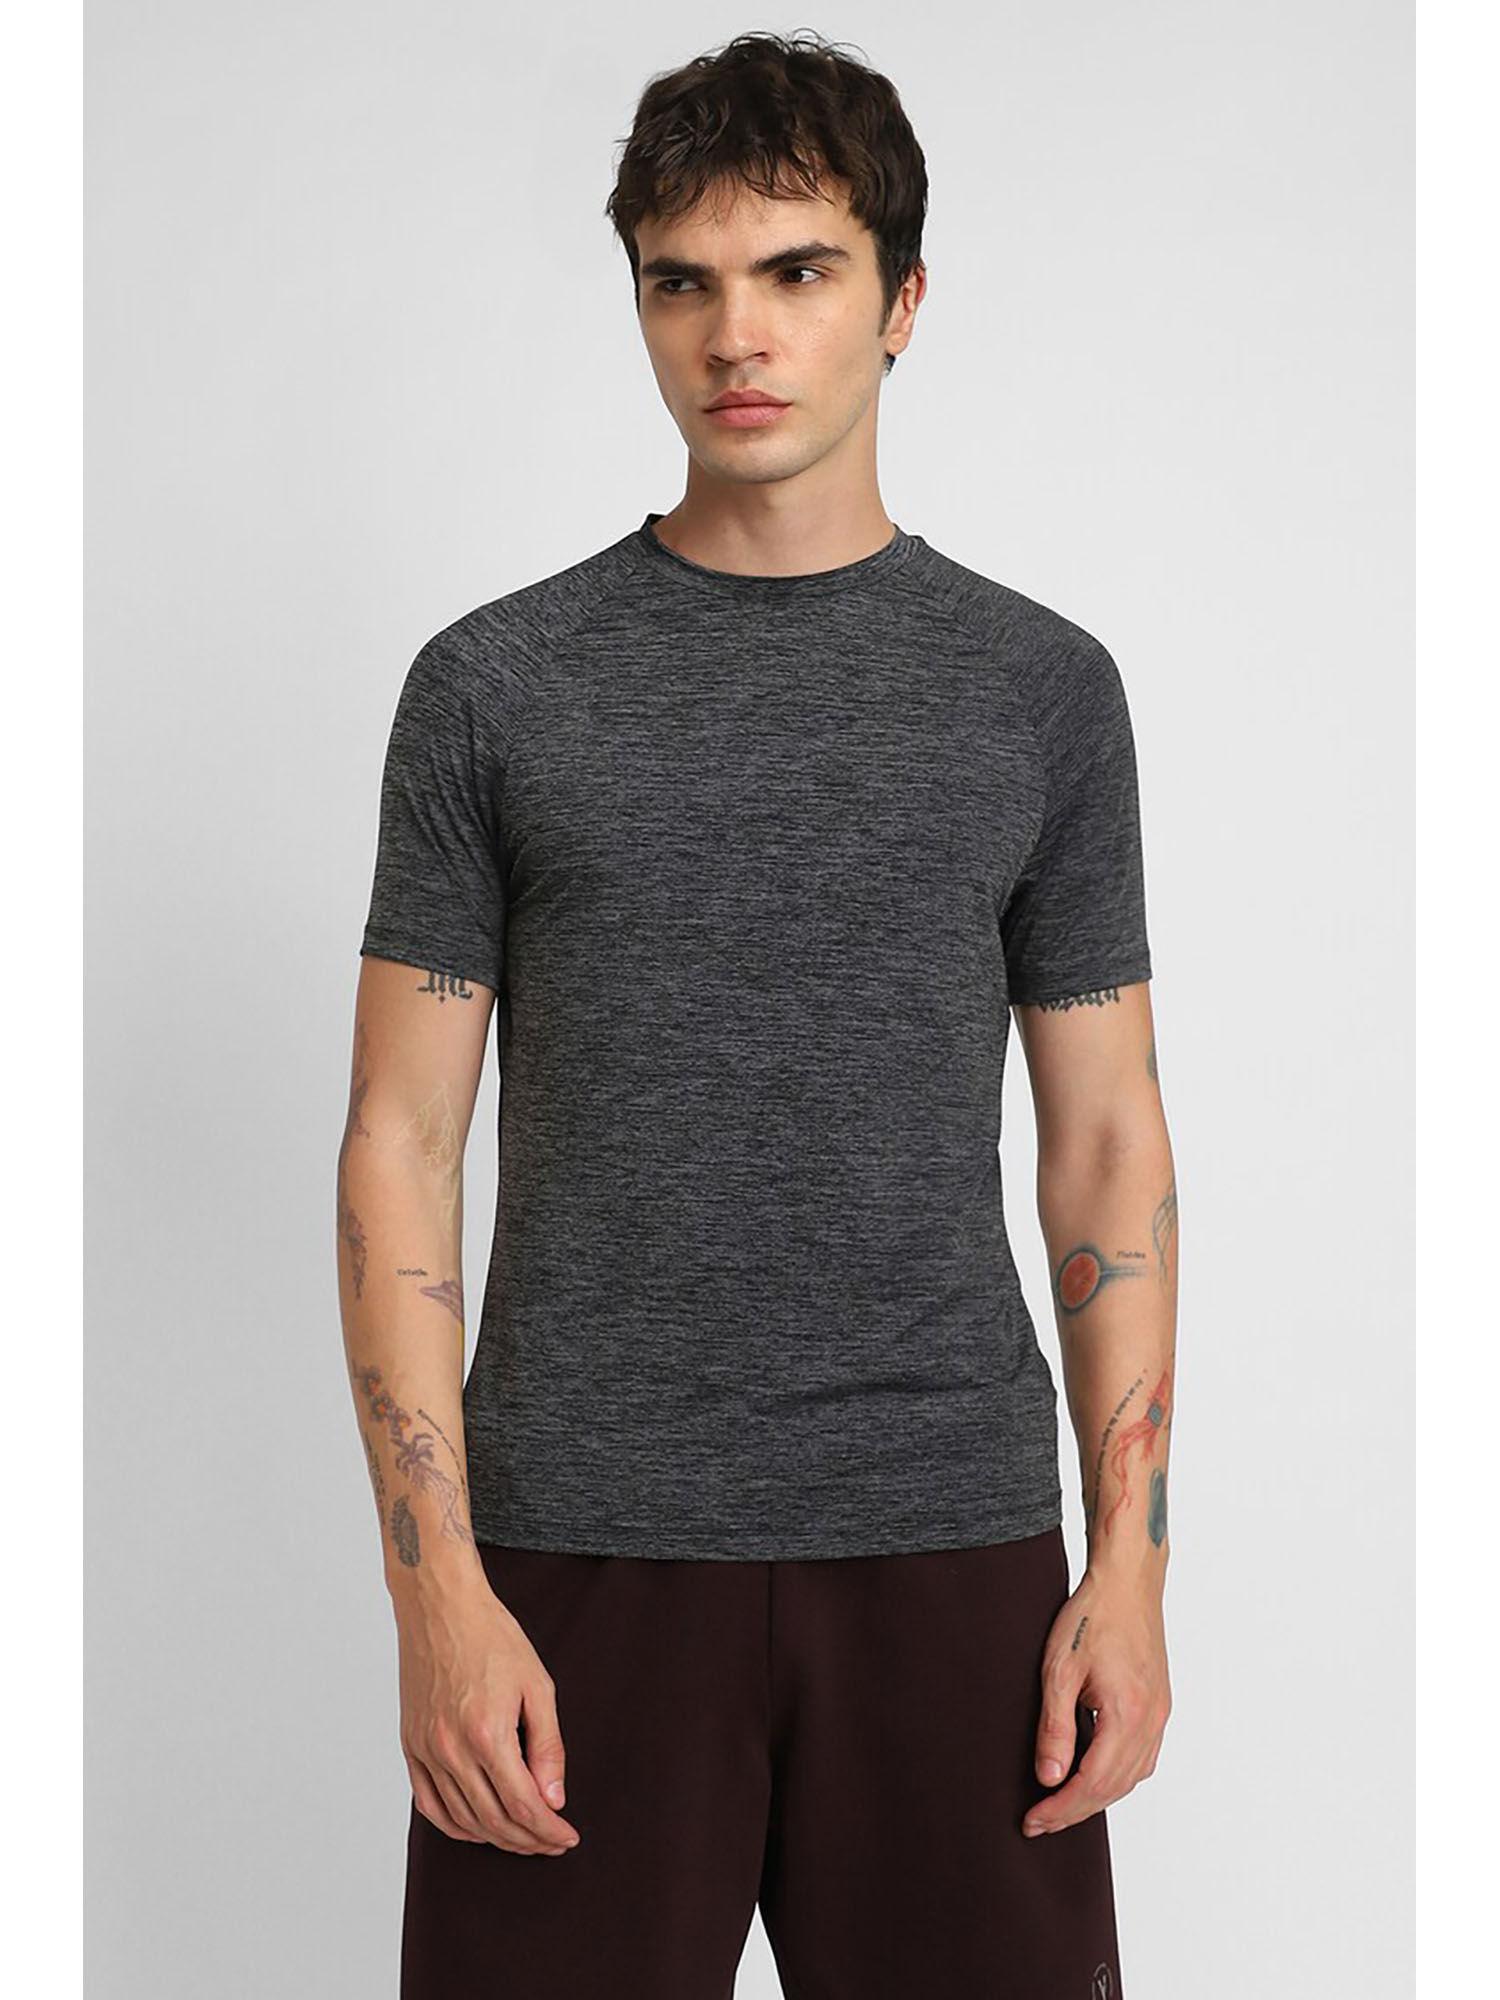 textured grey solid t-shirt